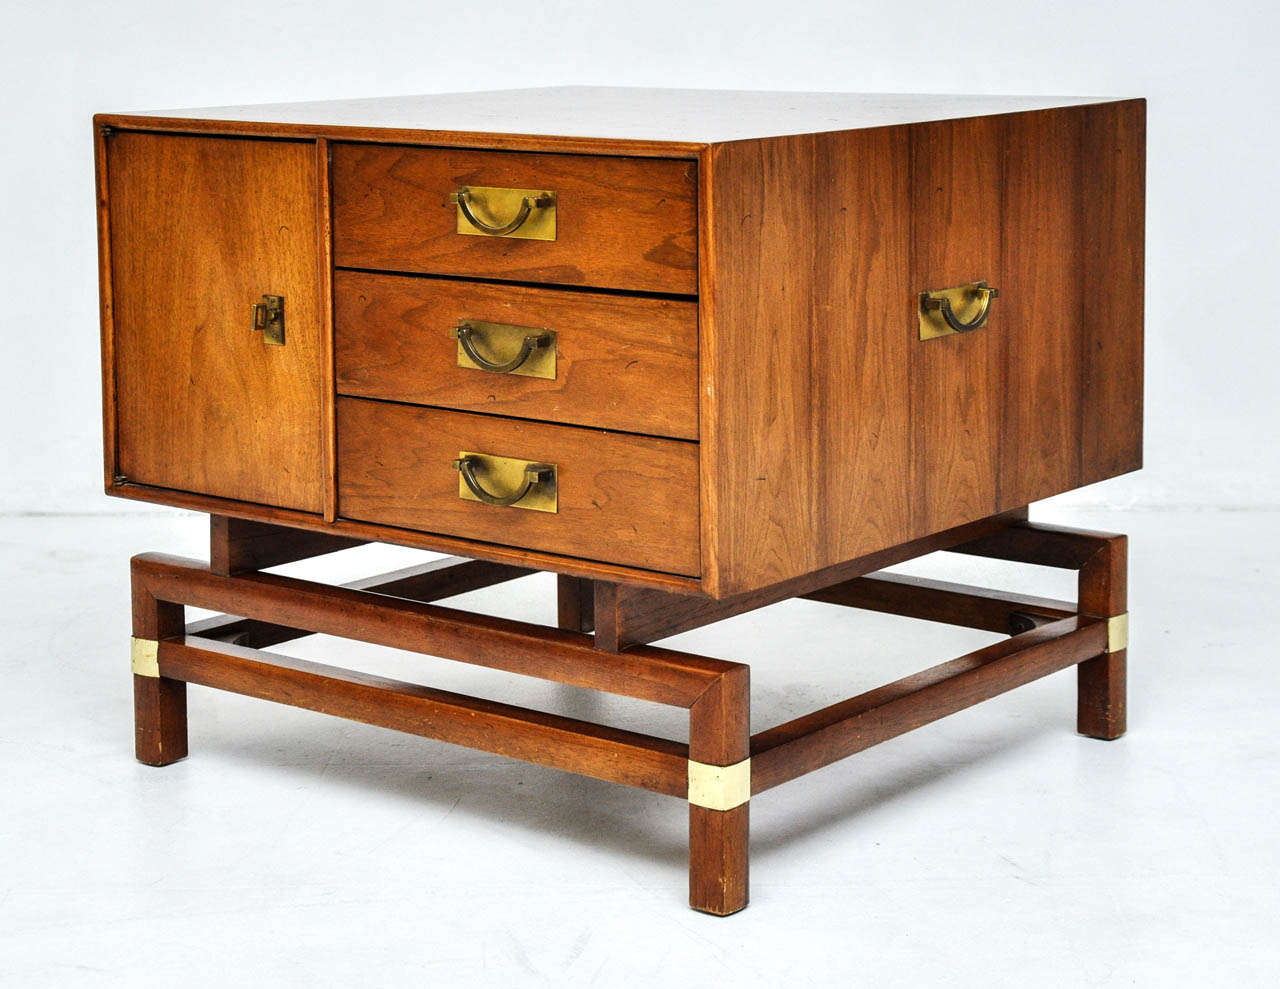 The perfect lamp table with storage.  Wood case with brass details.